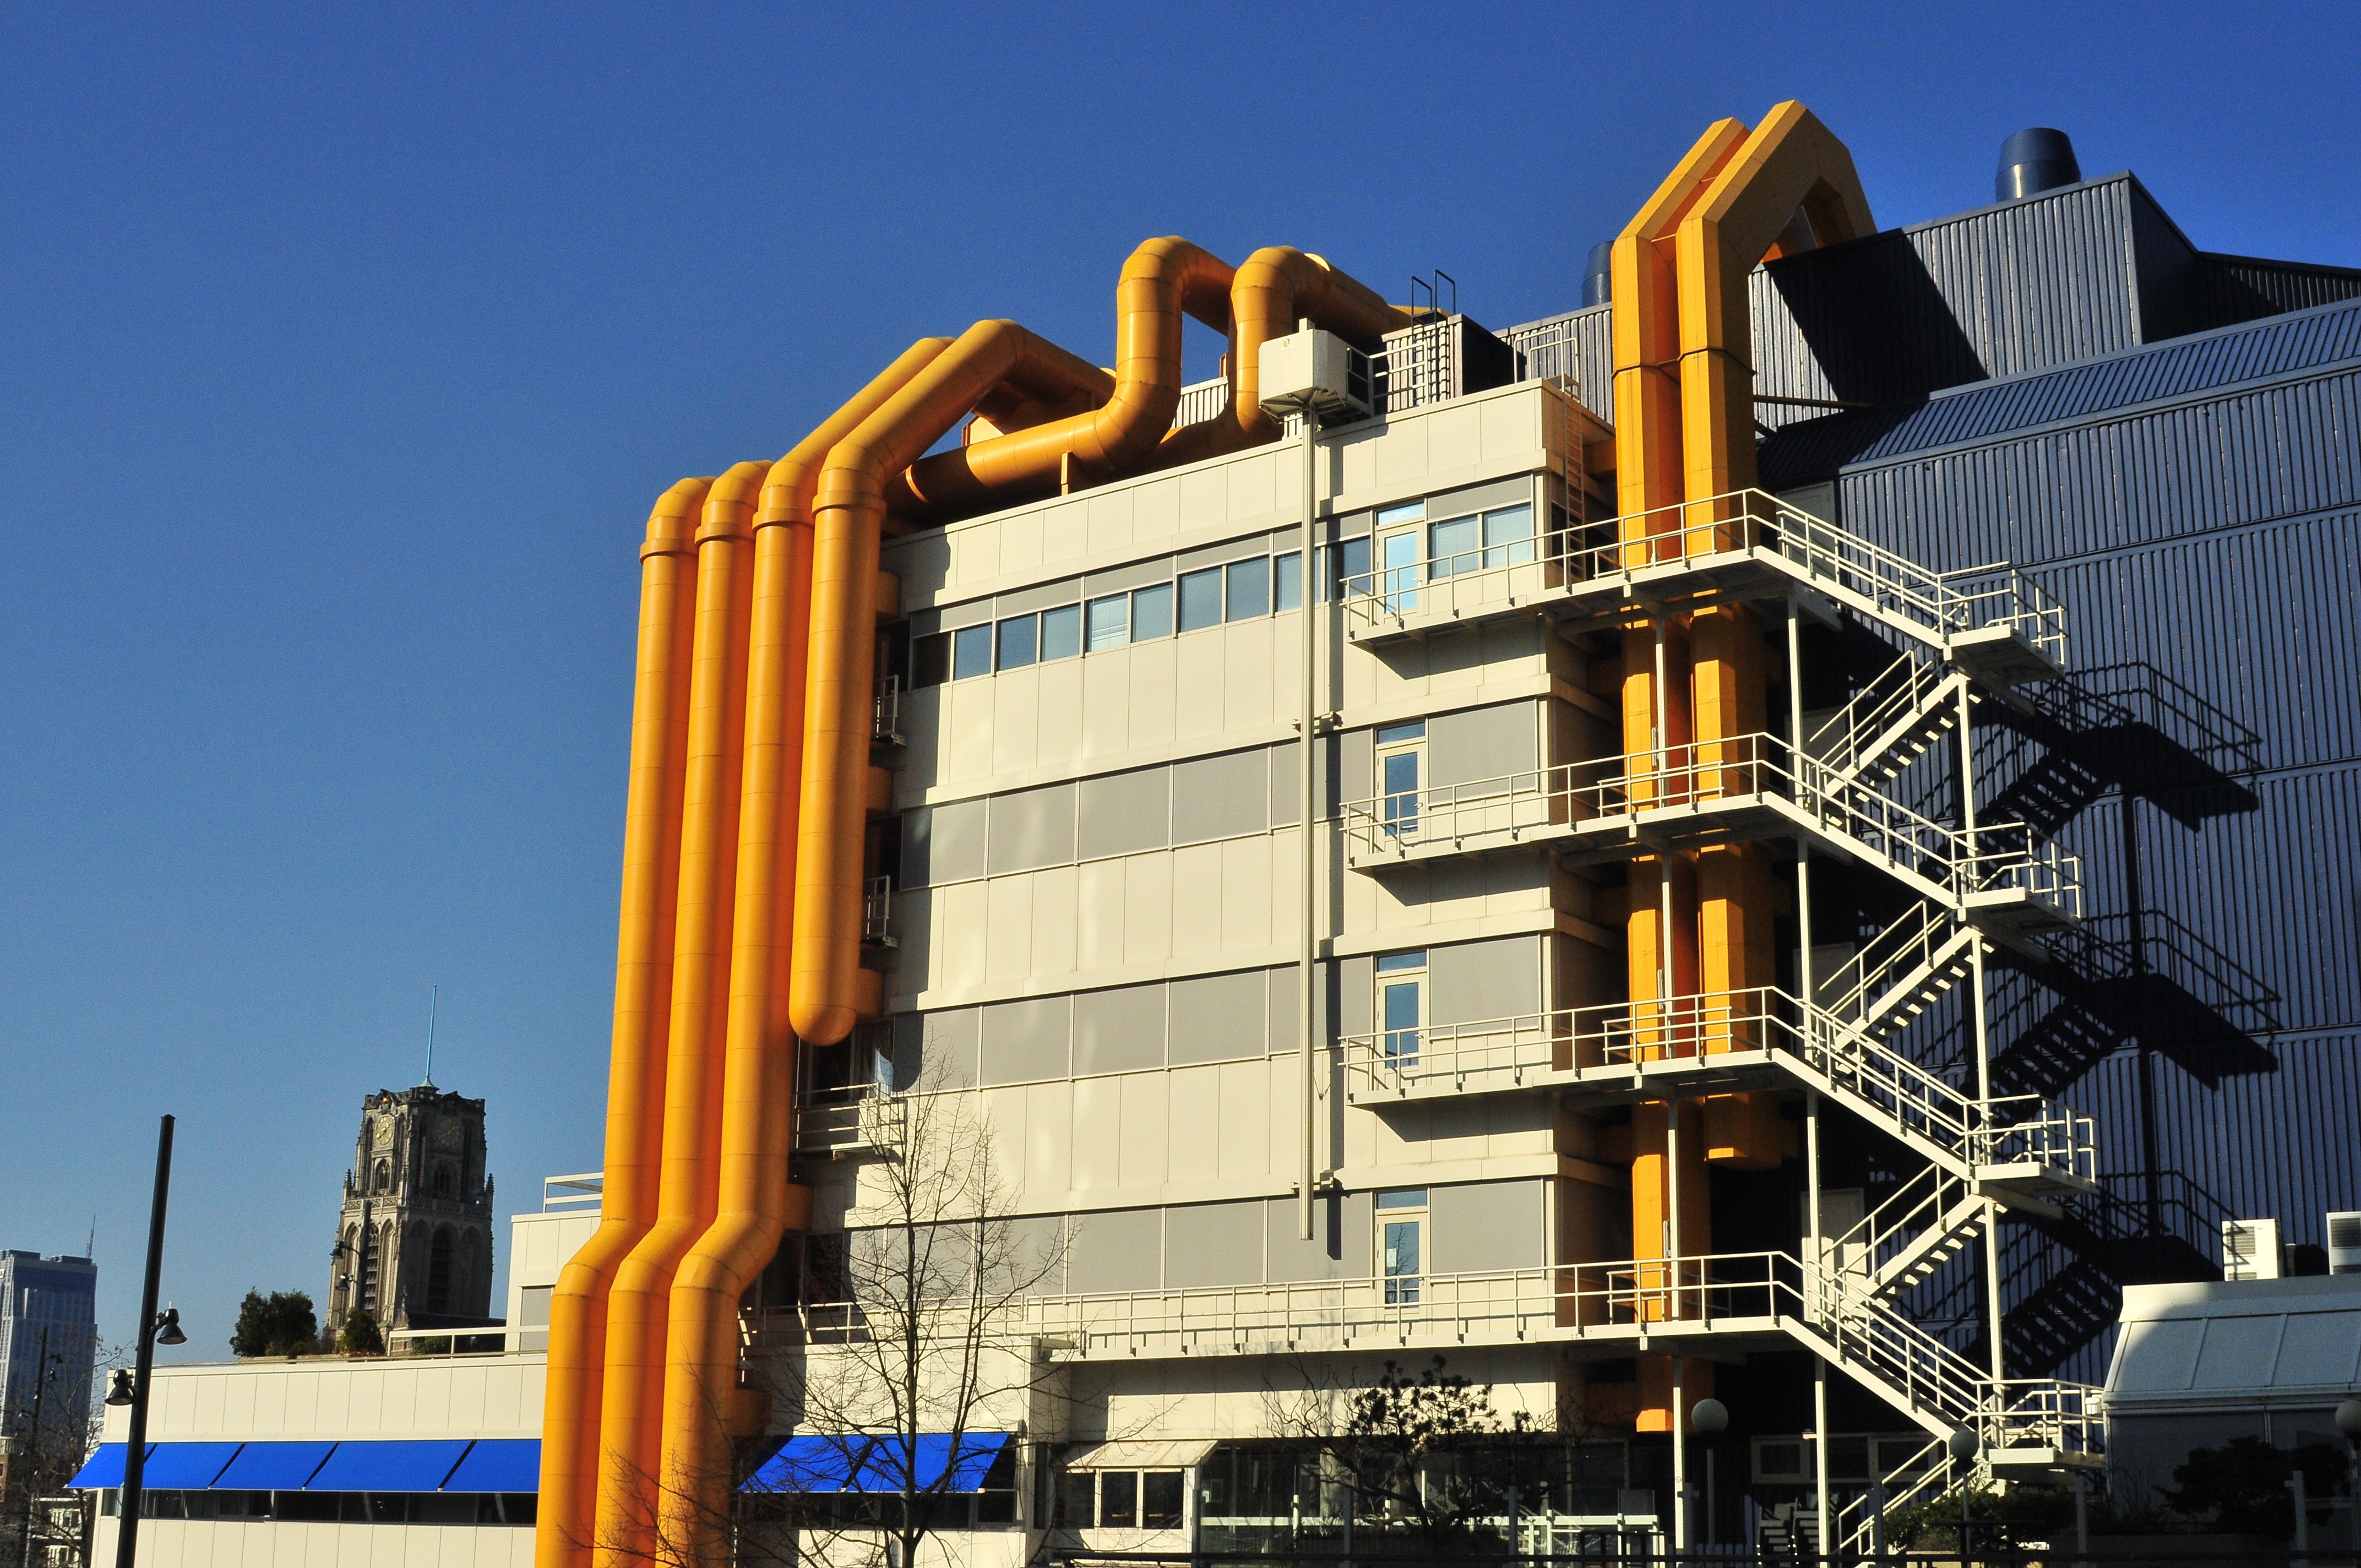 Photo of the Centrale Bibliotheek in Rotterdam, The Netherlands: an industrial looking building with metallic walls and various yellow pipes on the side.